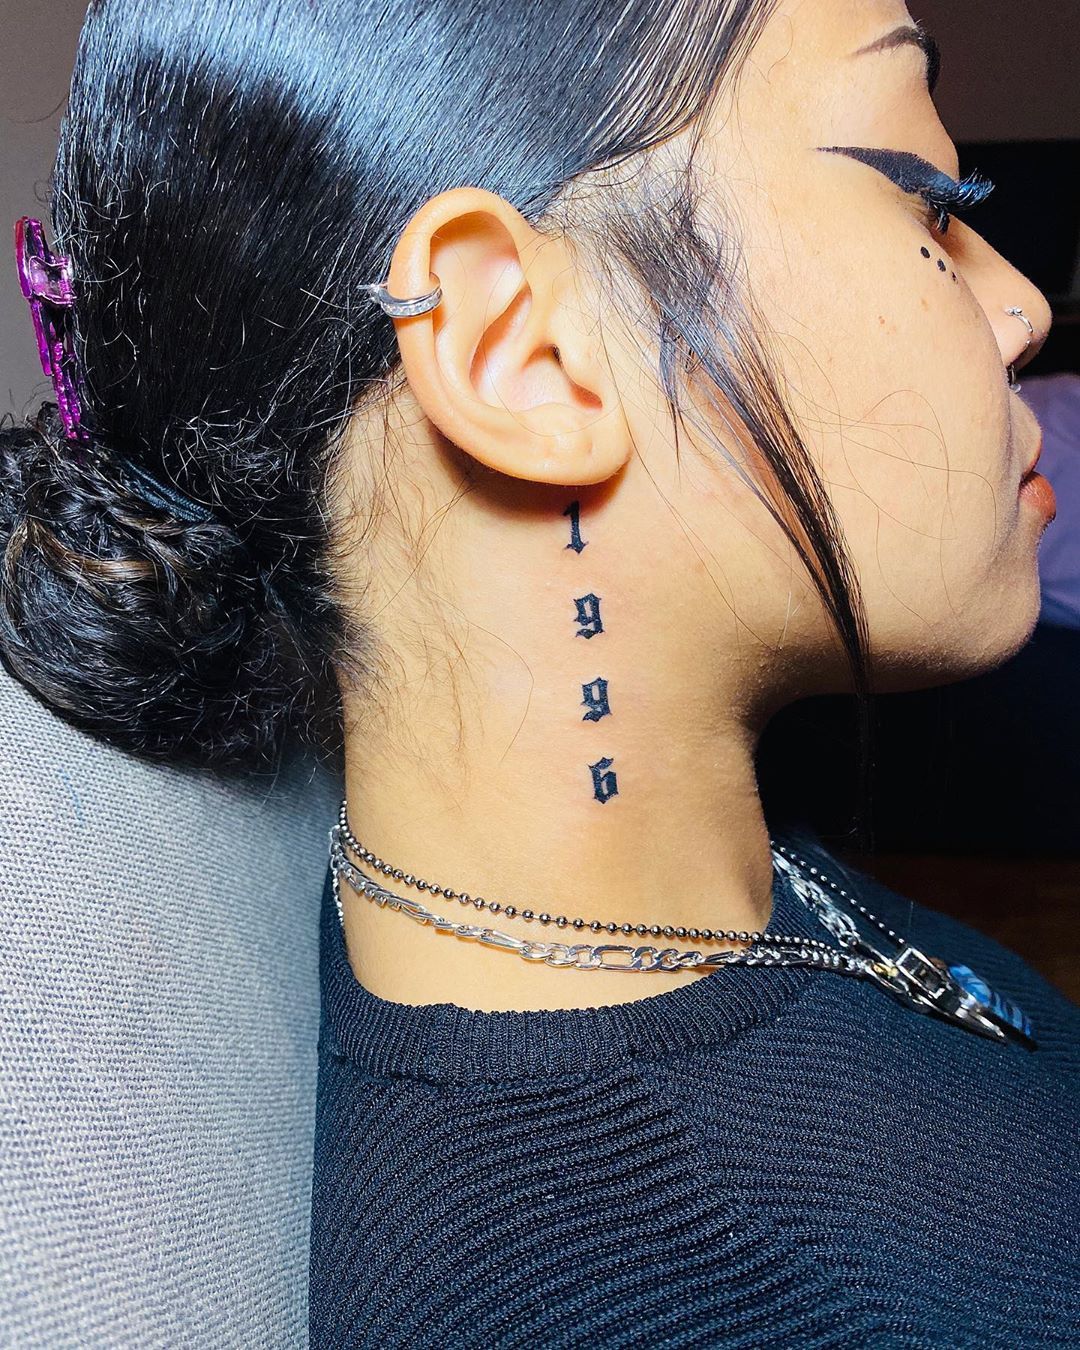 Neck tattoo placement ideas for women